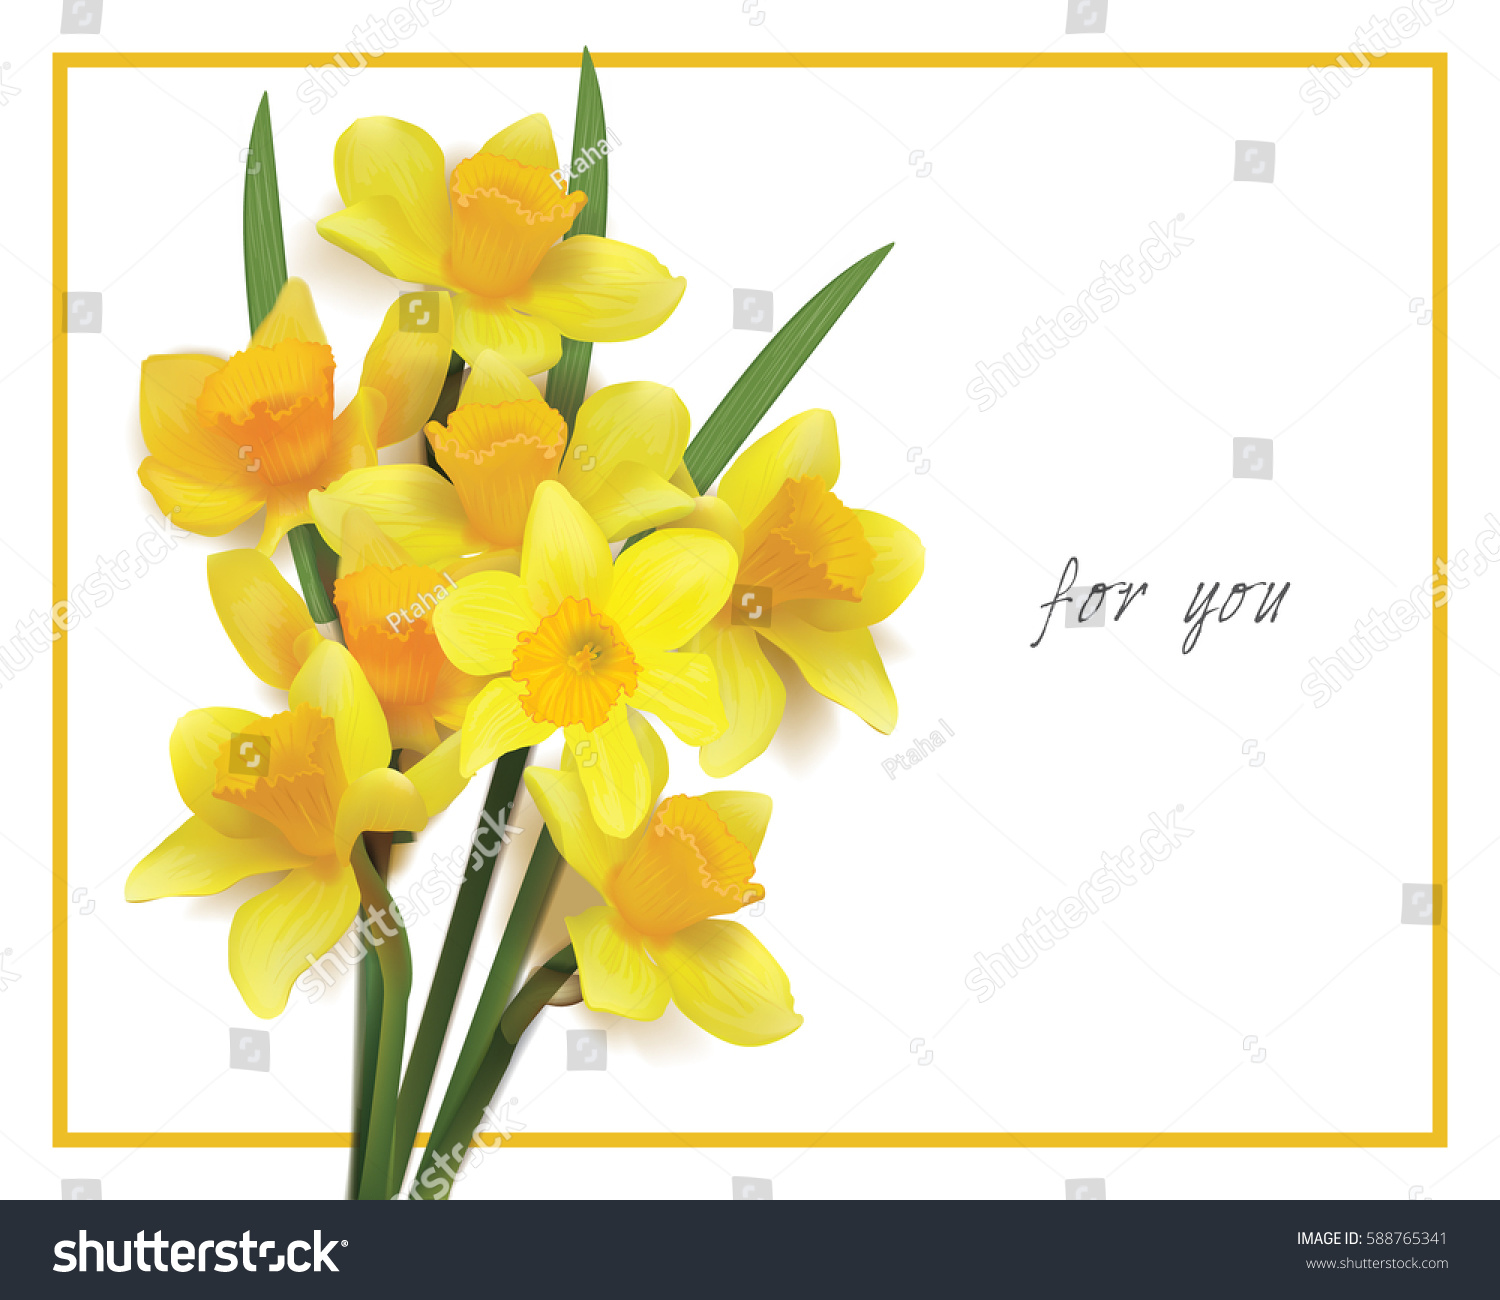 SVG of bouquet of yellow daffodils on a white background. Photorealistic vector. for you svg